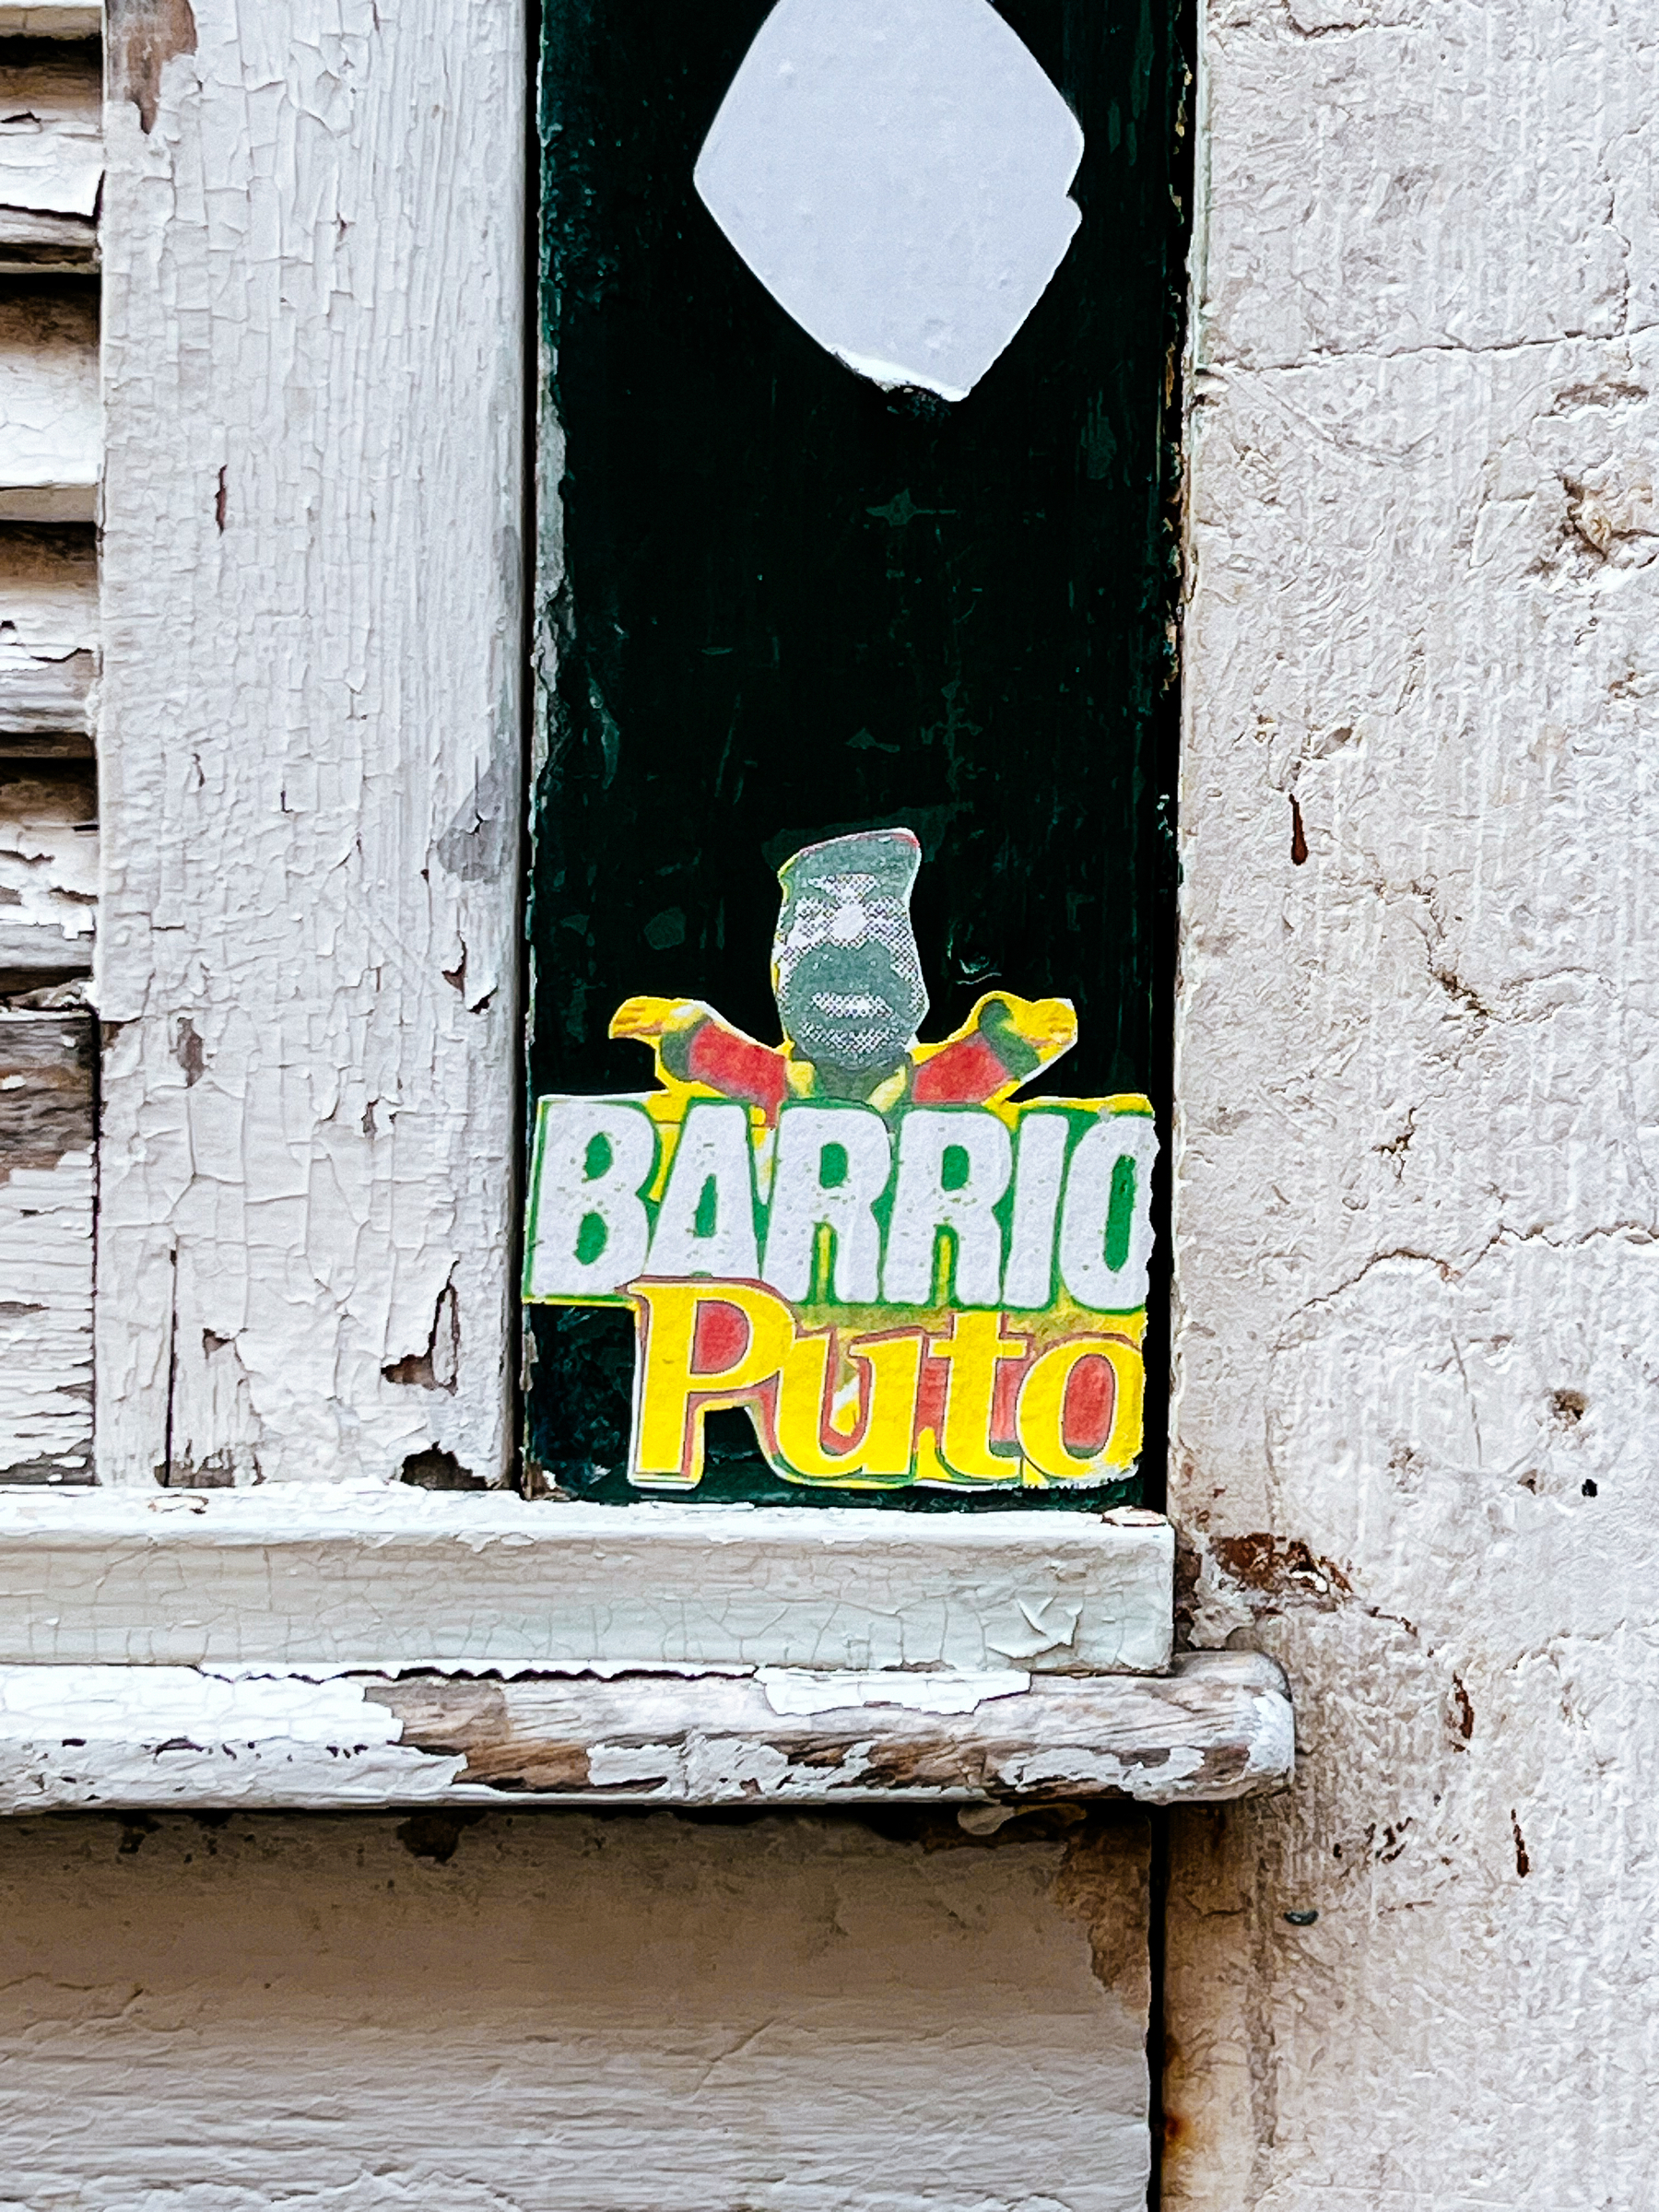 “Barrio Puto”, with a picture of Saddam Hussein over it. We do seem to have an incredible amount of Saddam stickers in the city!